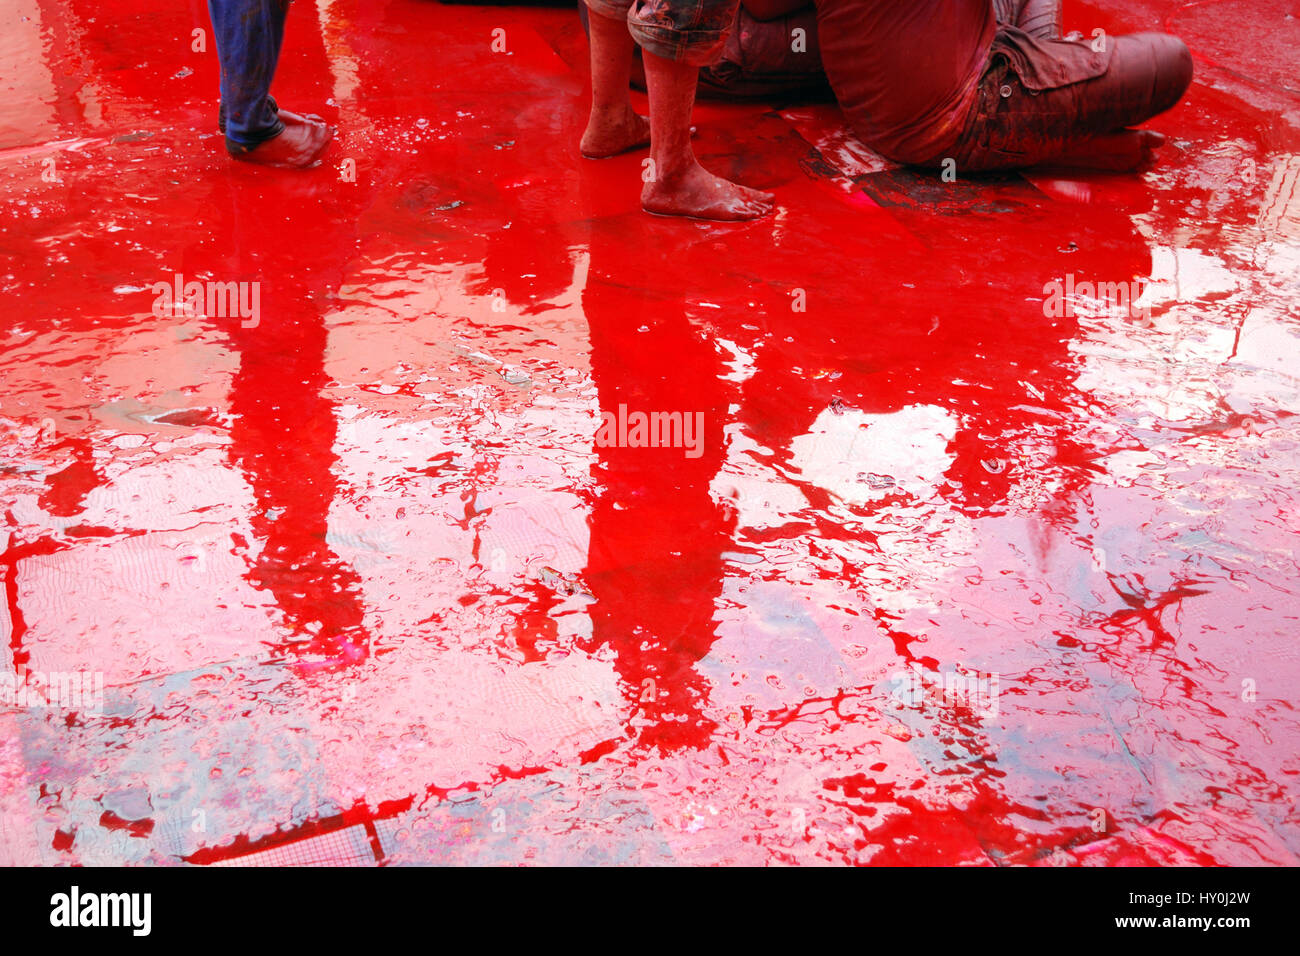 Red colour on floor of temple, jodhpur, rajasthan, india, asia Stock Photo